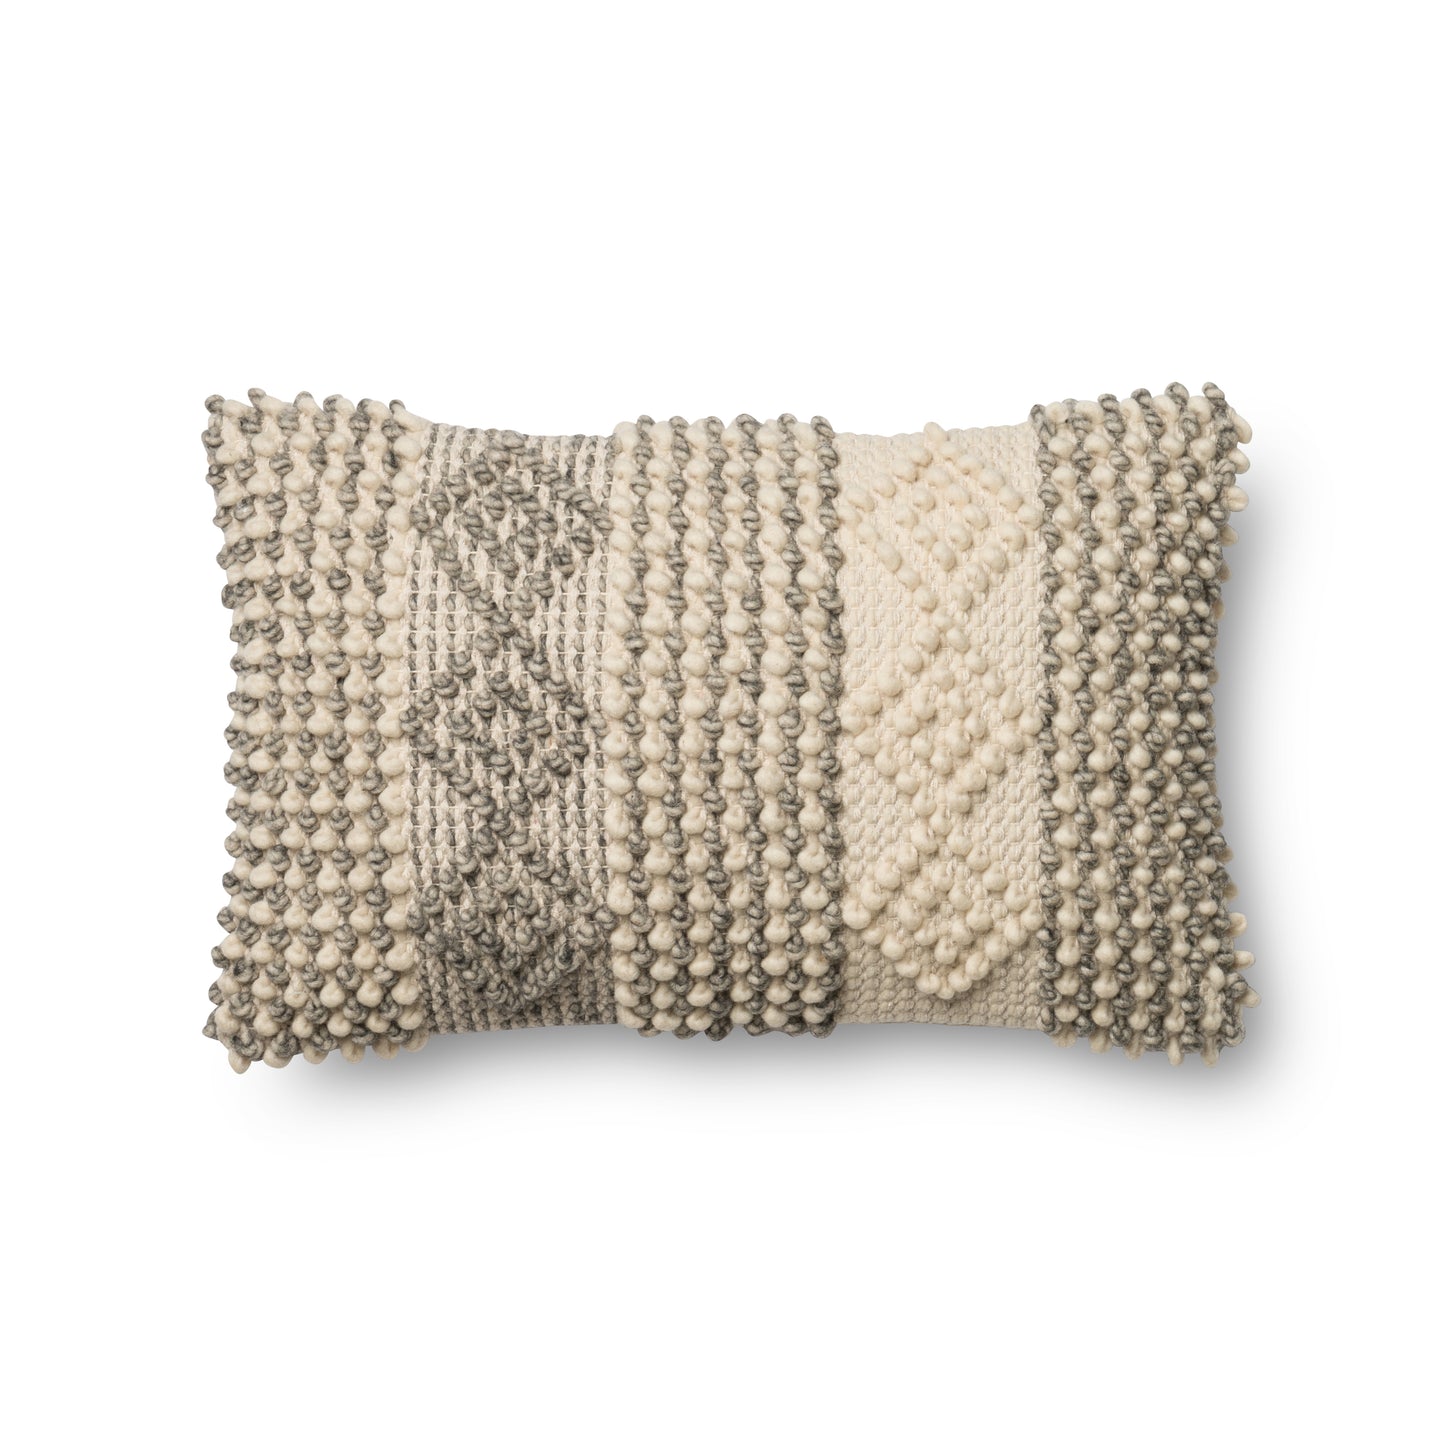 PILLOWS P0461 Synthetic Blend Indoor Pillow from Magnolia Home by Joanna Gaines x Loloi